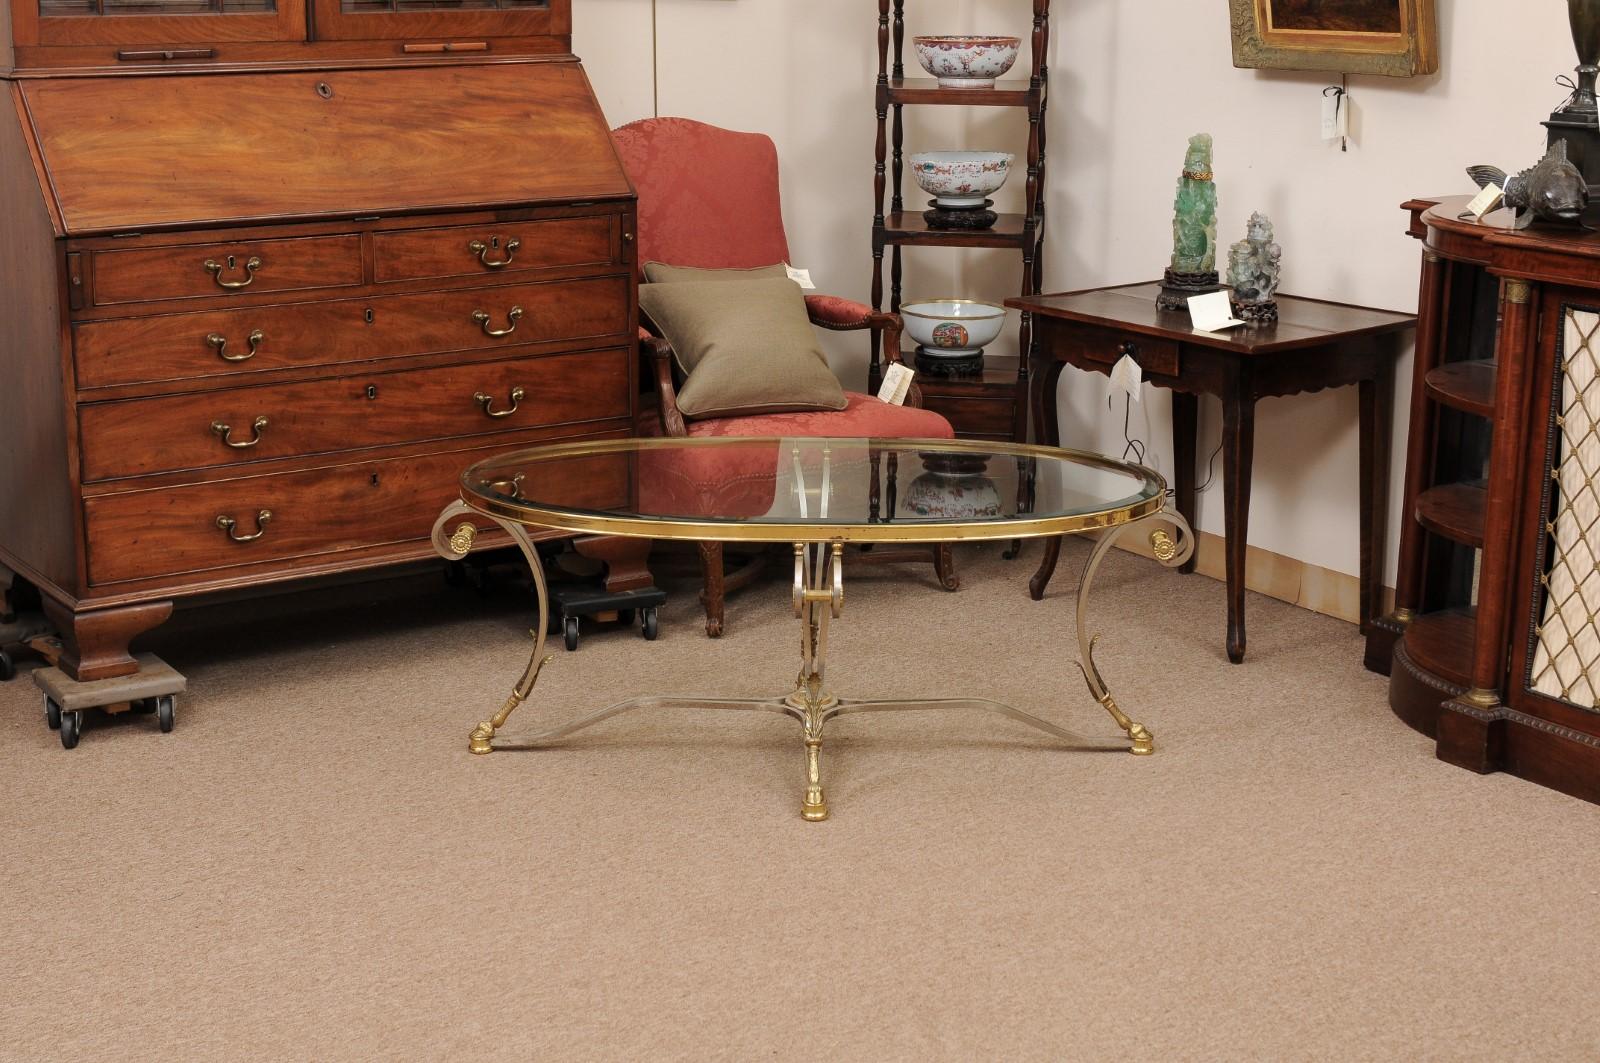 Oval French Steel & Brass Coffee Table with Glass Top, Hoof Feet & Acorn Detail 4